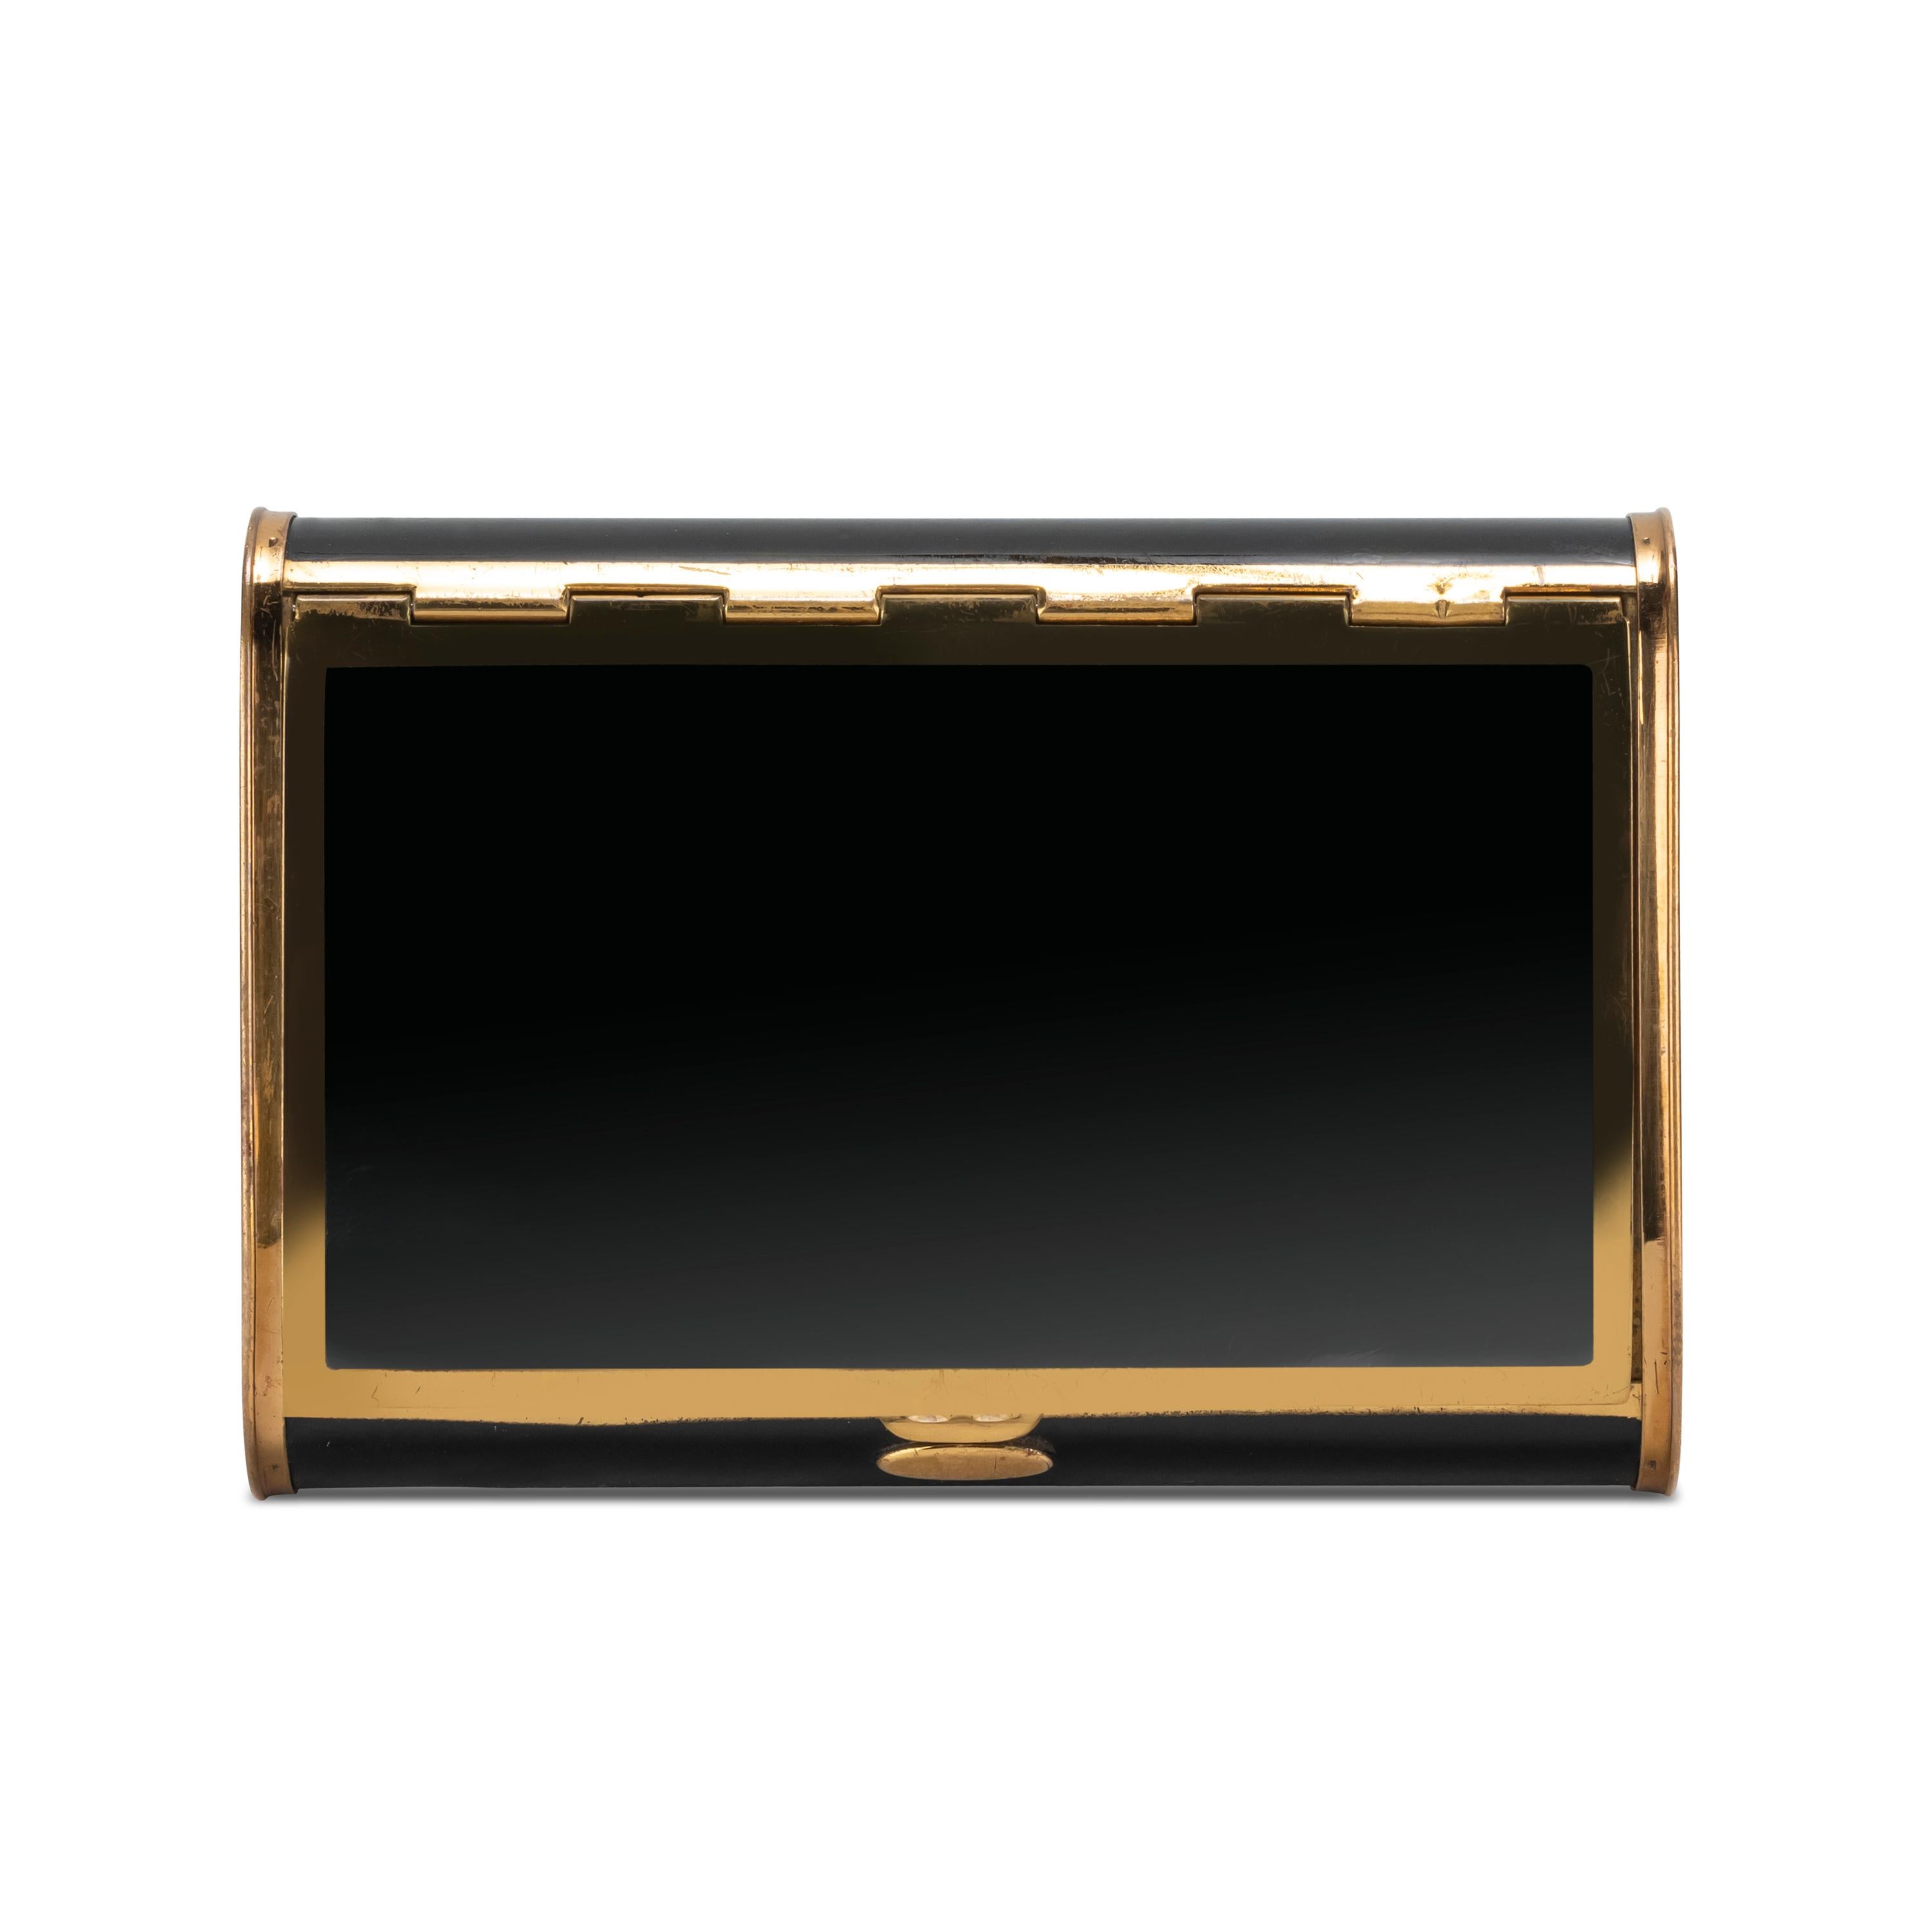 1950s Vintage Art Deco Cigarette Case 
VINTAGE TIN CIGARETTE CASE Black Lacquer GOLD TONE TOBACCO CASE INSIDE & TRIM
Not sure about the brand but the condition is good, most of the black enamel is in great condition. 
